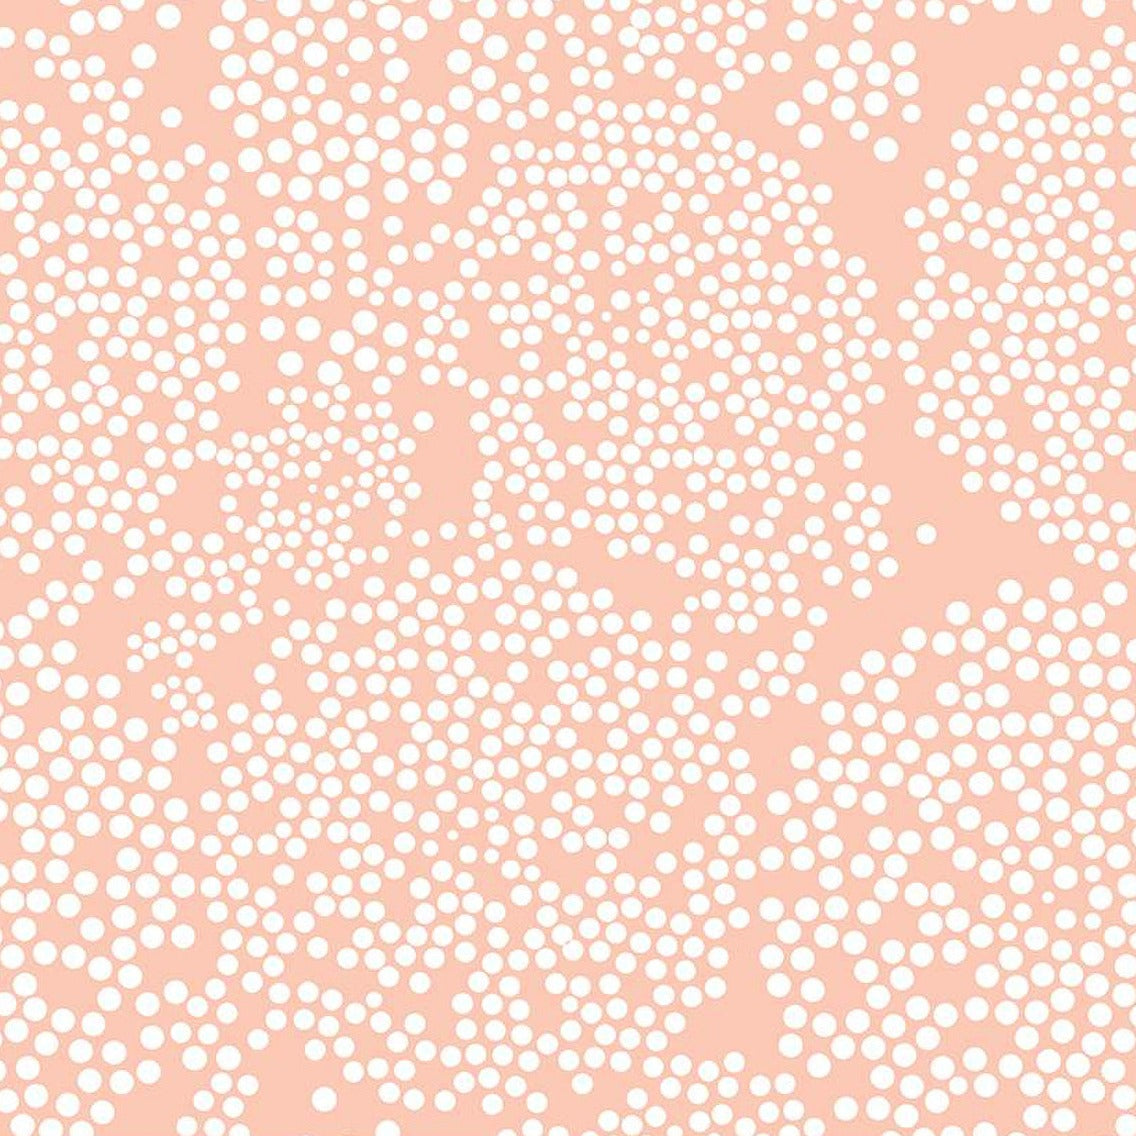 Day in the Life - Dots - Blush